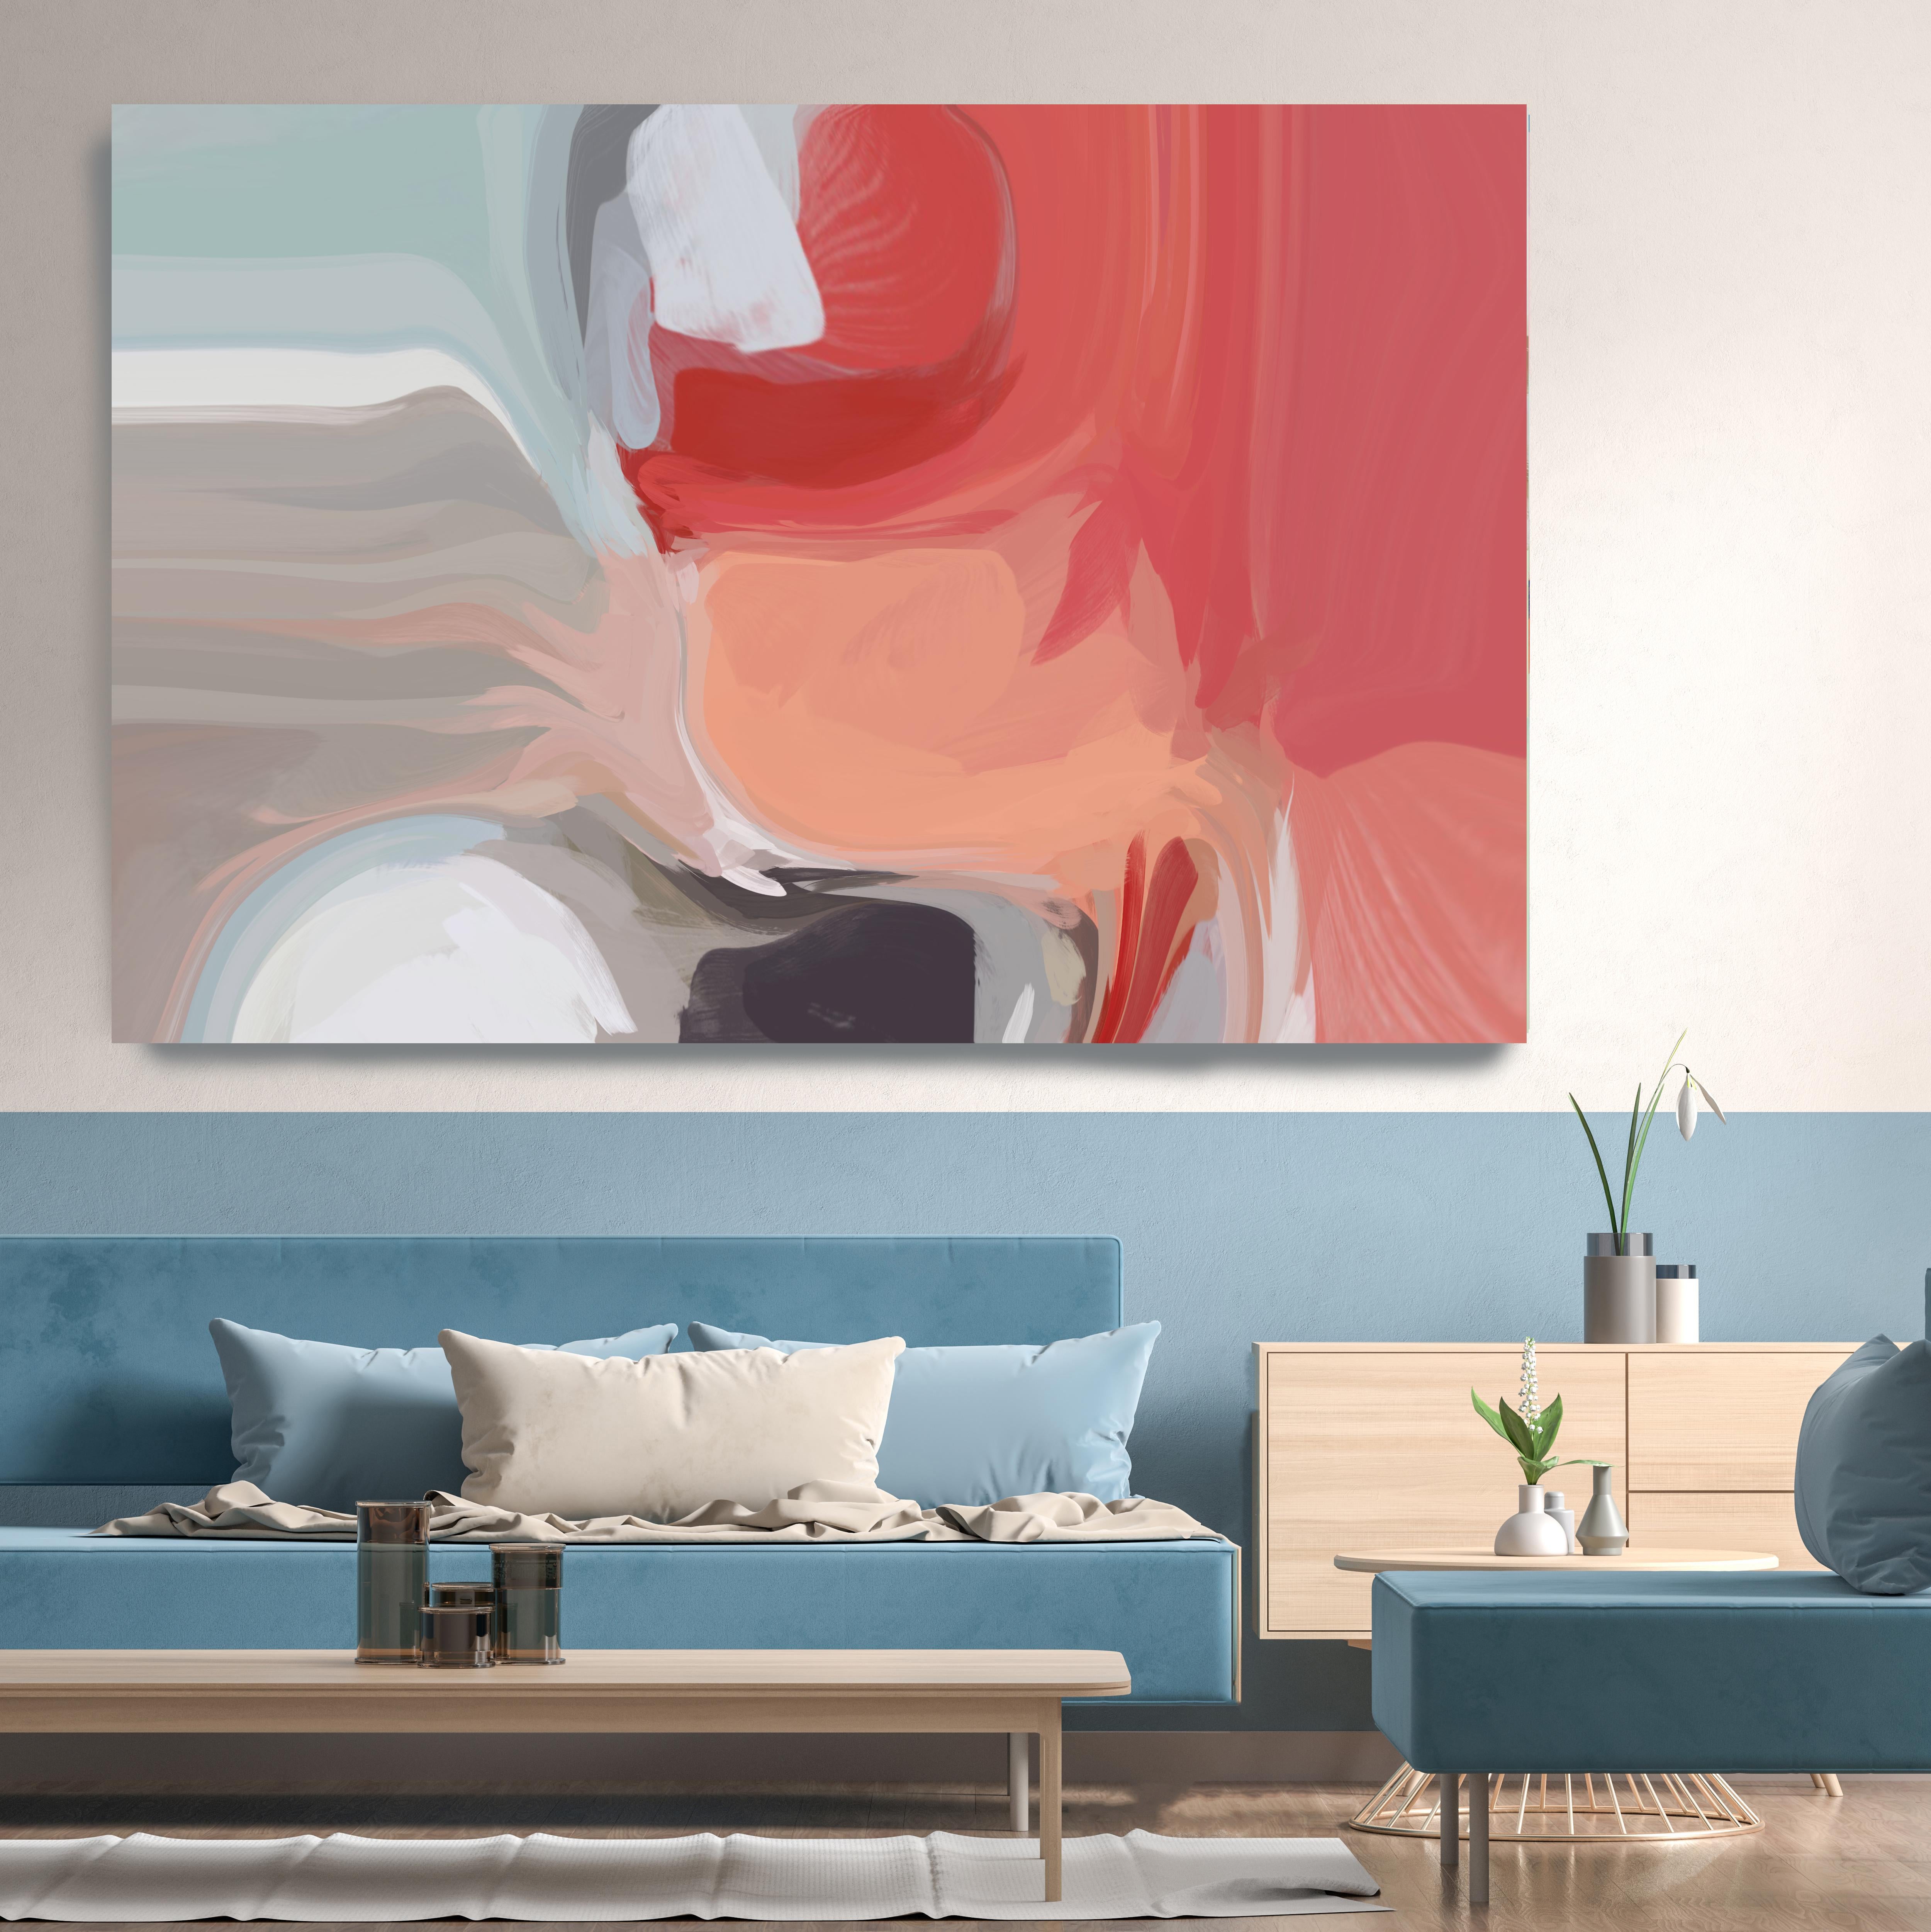 Coral Red Contemporary Flow Painting Mixed Media Canvas 38x56" Moment